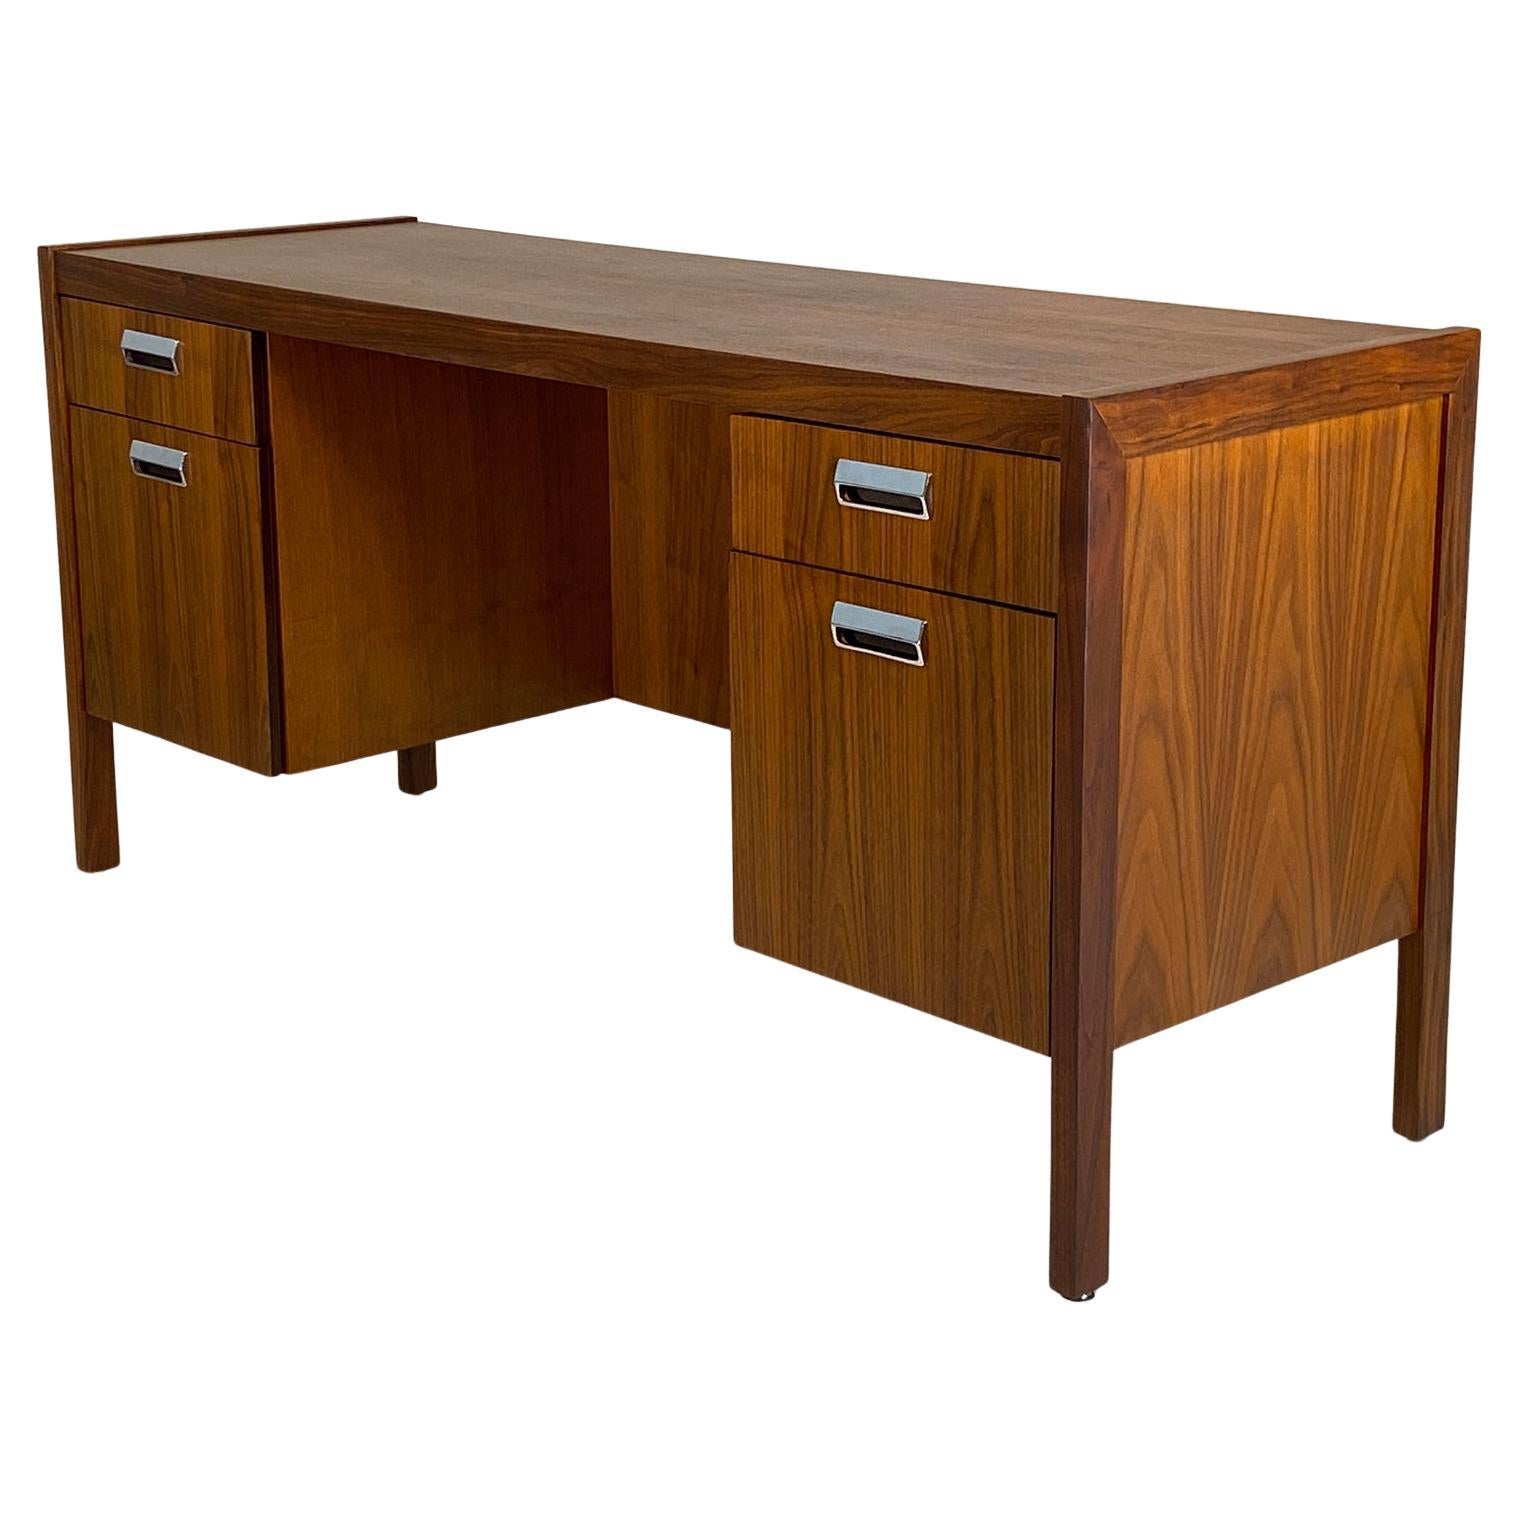 Thin Profile Walnut Desk with Chrome Accents